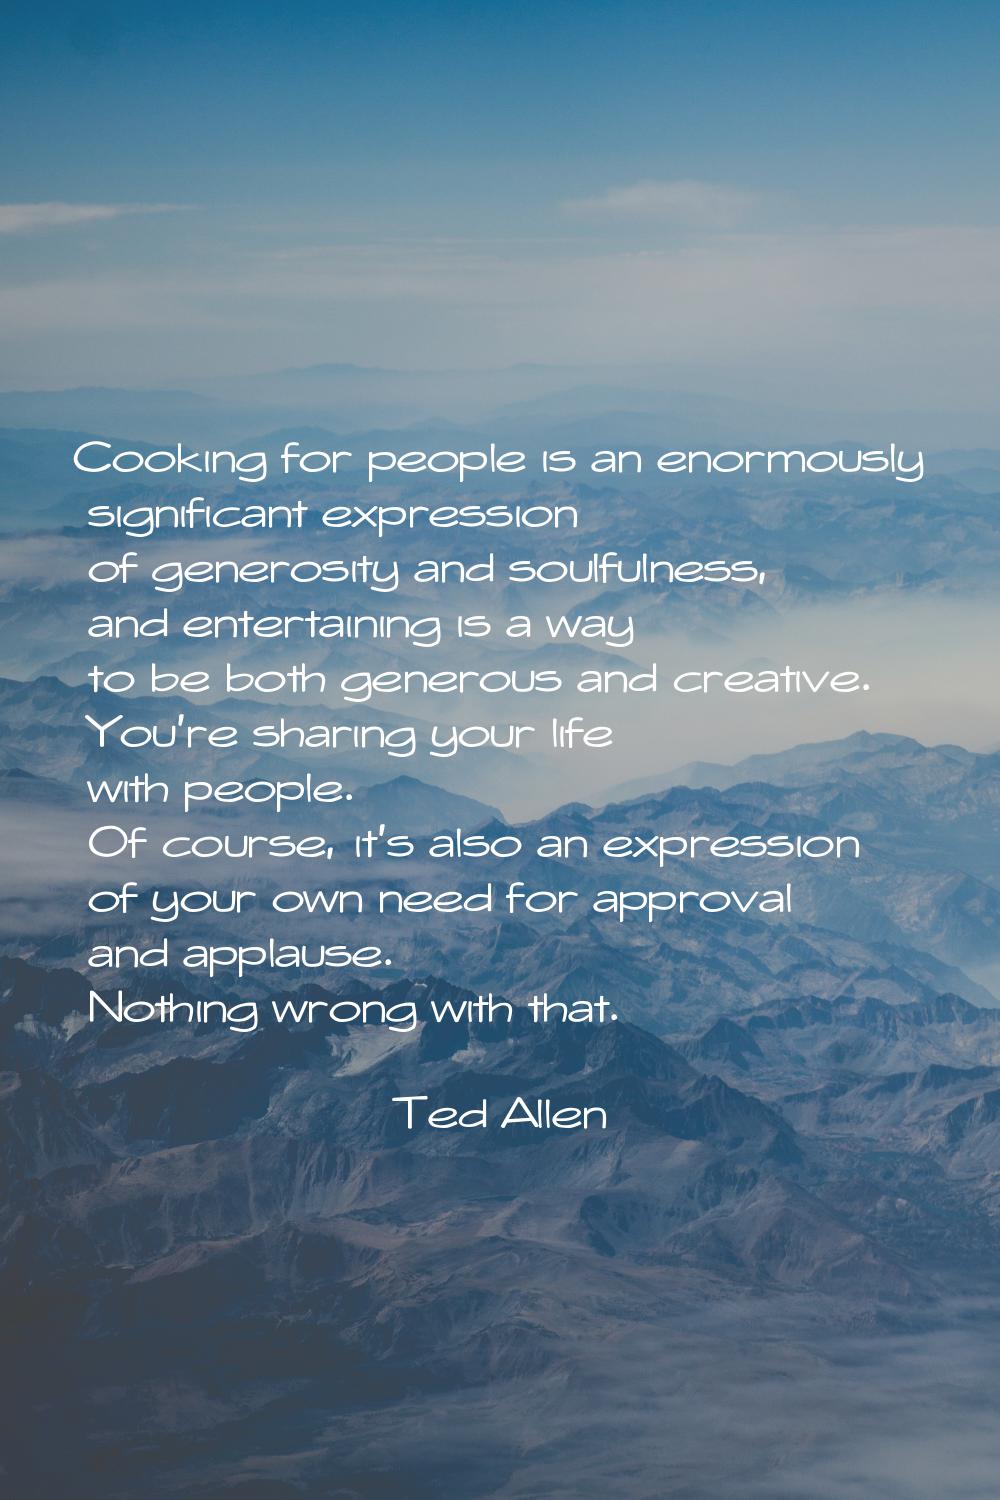 Cooking for people is an enormously significant expression of generosity and soulfulness, and enter